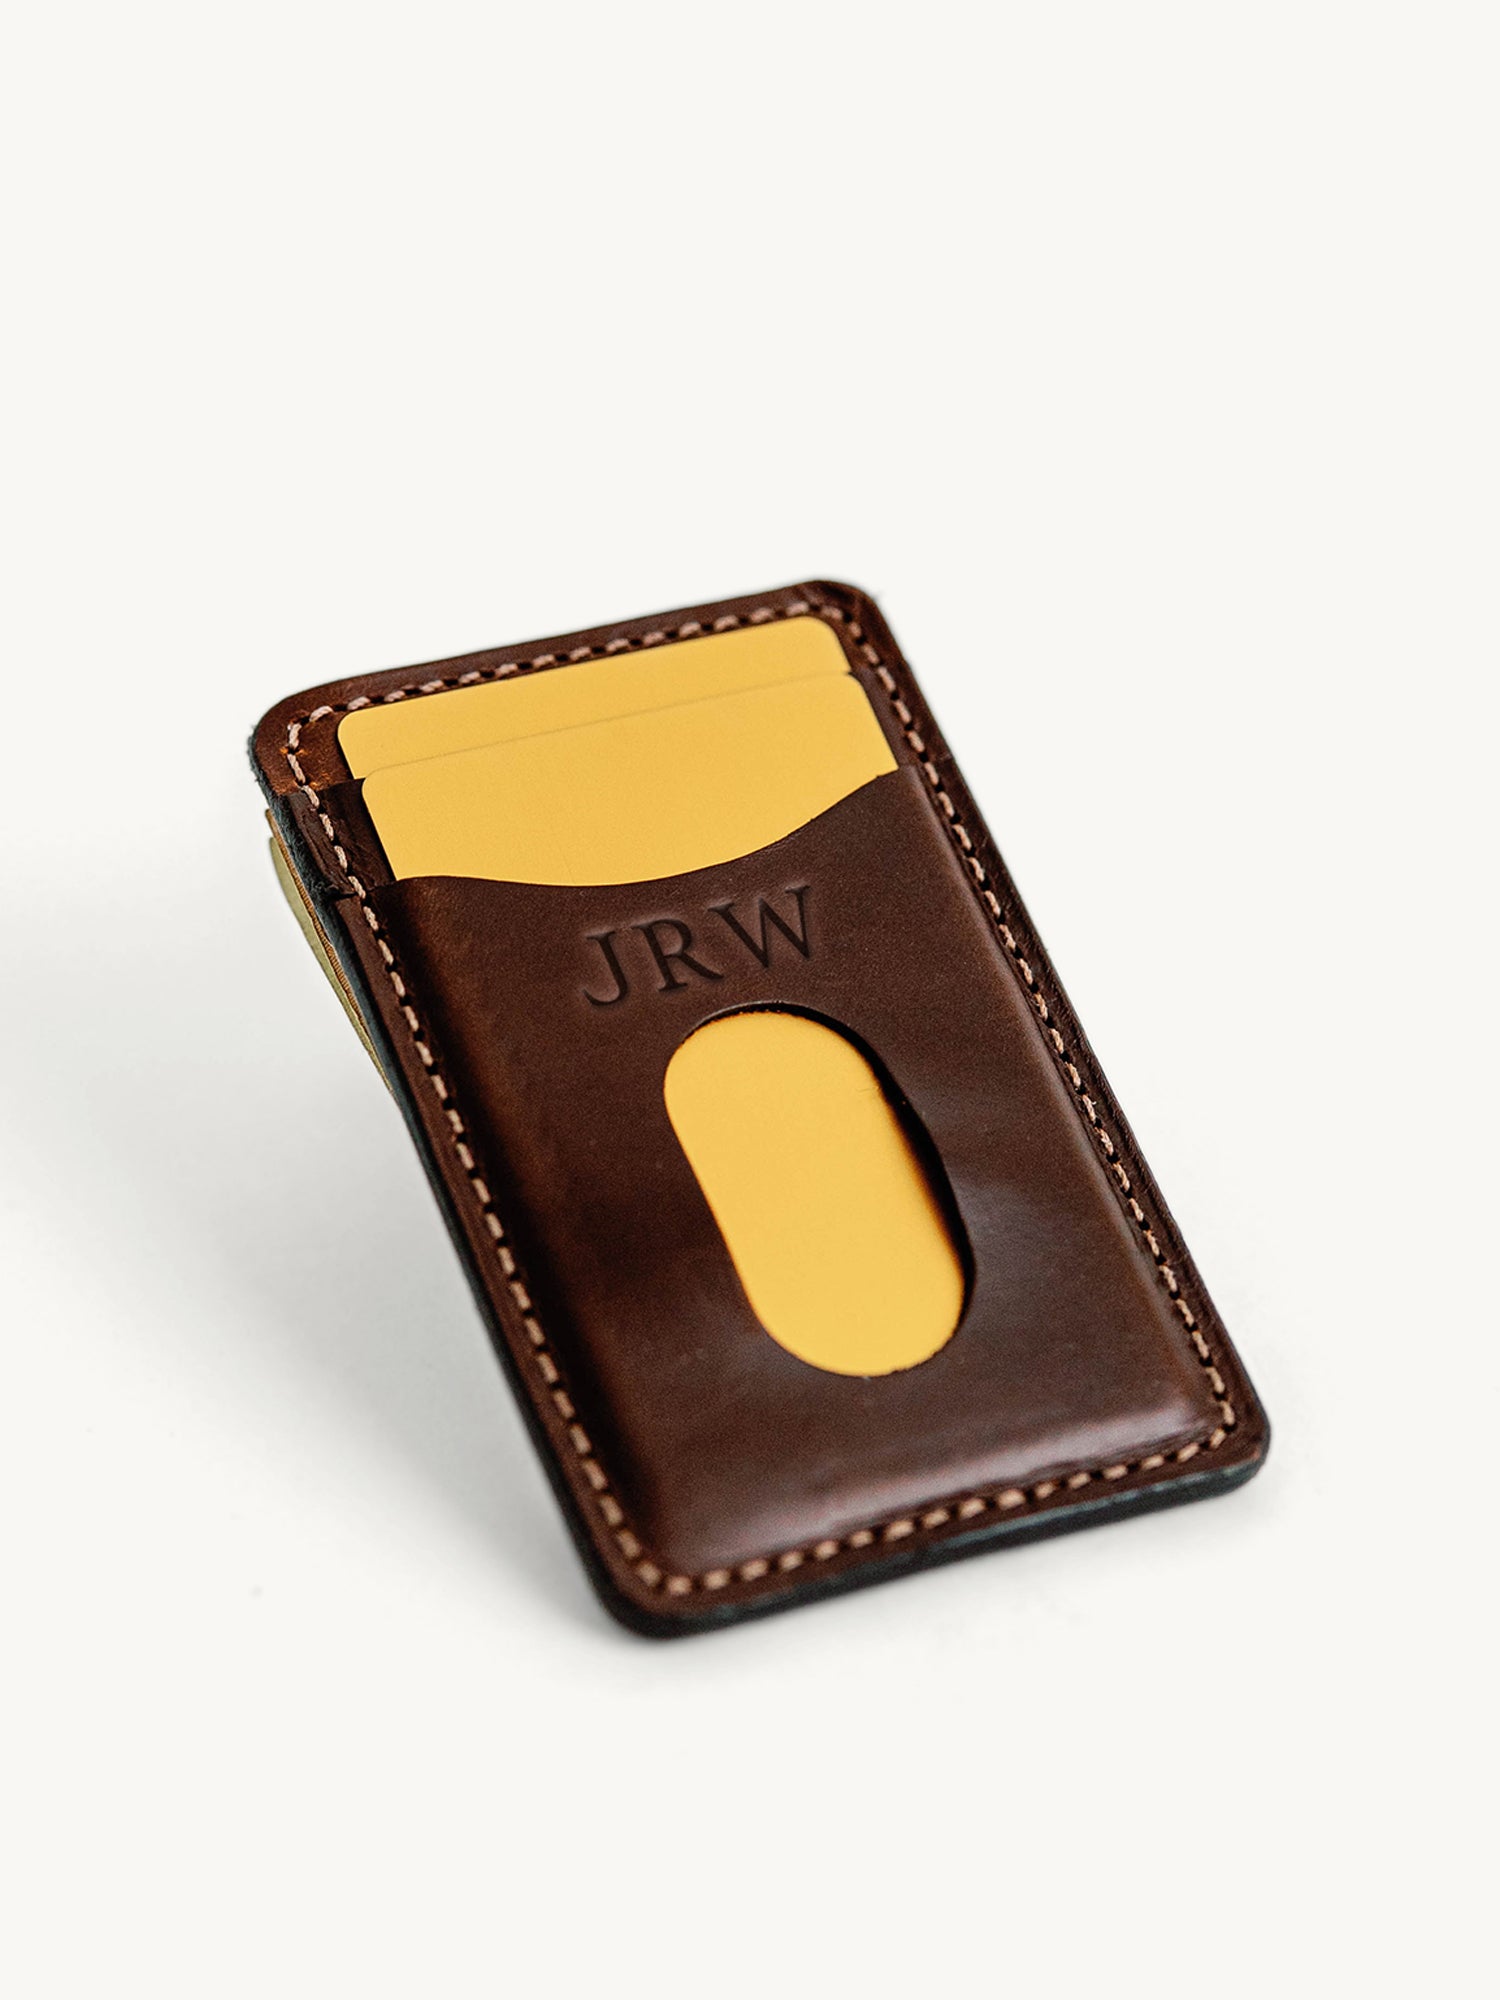 Money Clip: How to Use a Money Clip Wallet